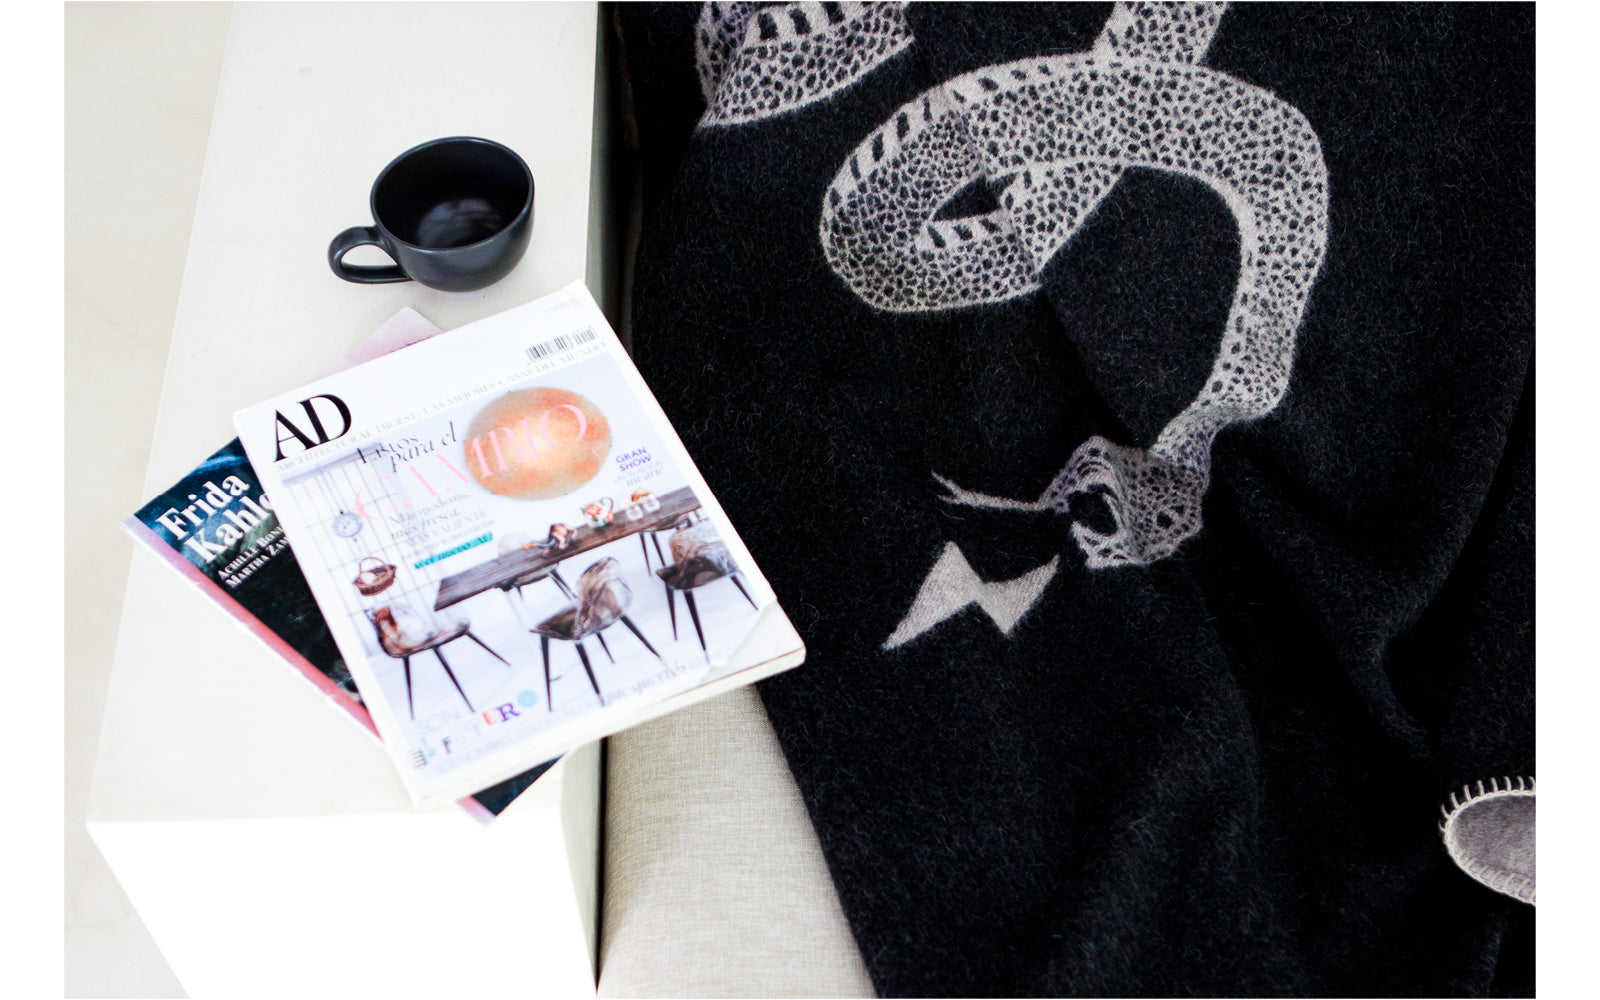 Blacksaw 100% Baby Alpaca wool art blankets best paired with coffee and Architectural Digest